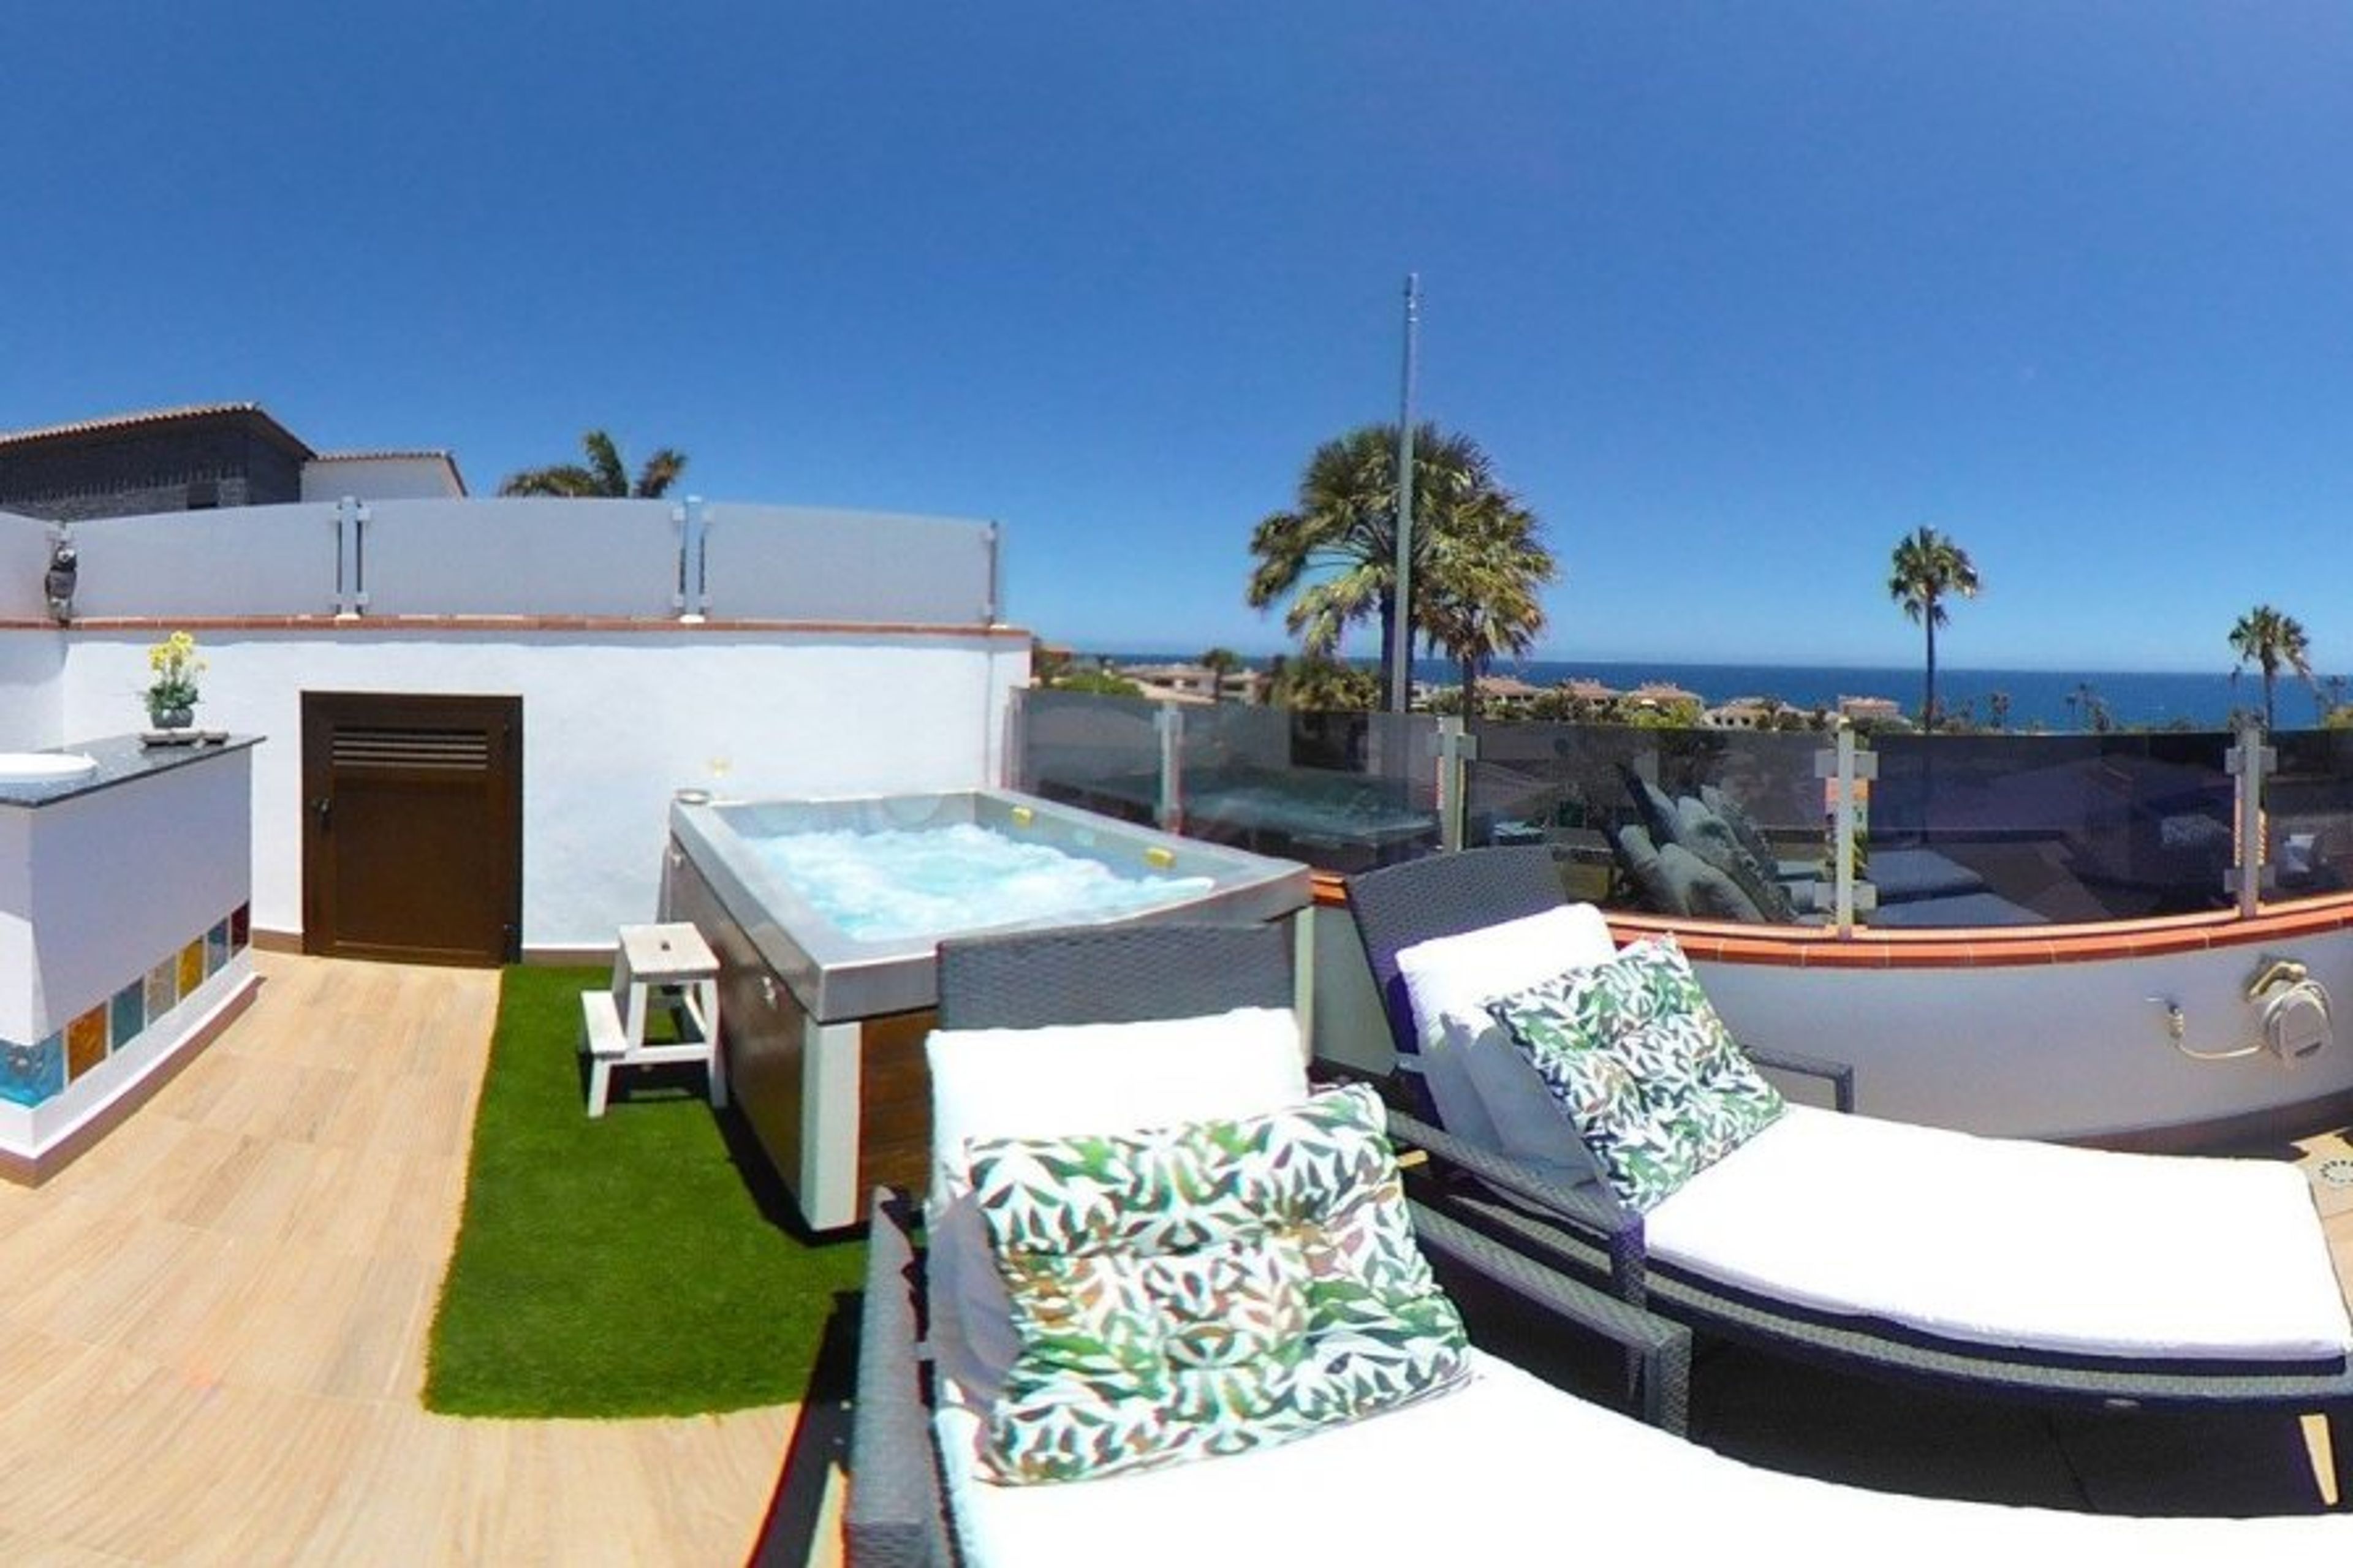 Jacuzzi on the private roof terrace with stunning views!